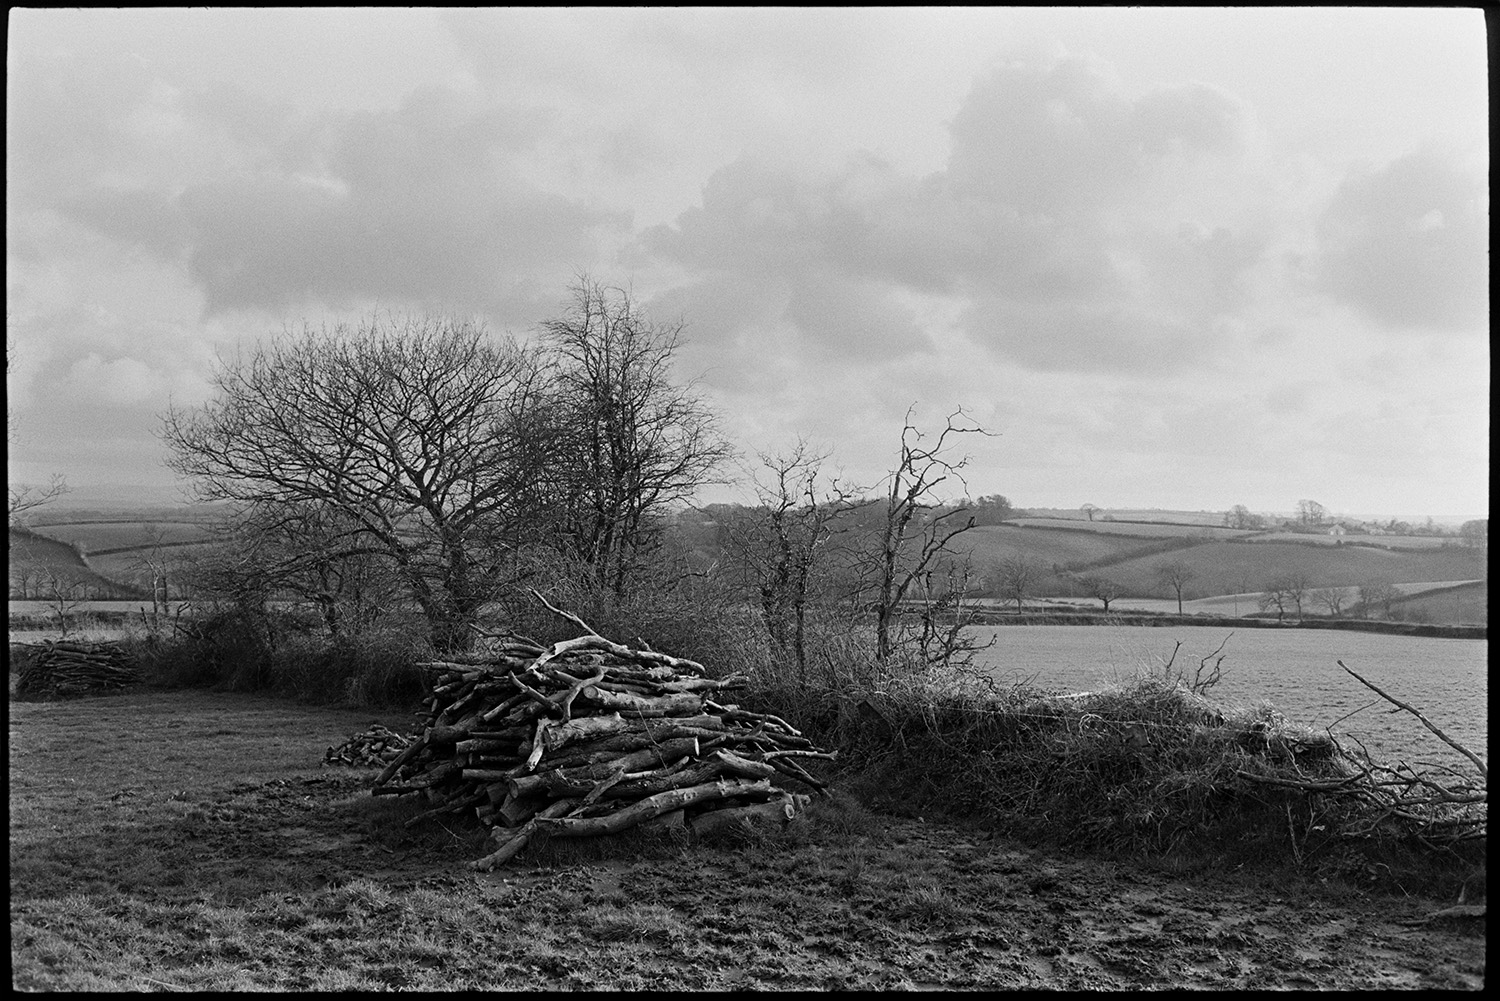 Woodpile in winter landscape. 
[A woodpile by a hedge in a field at Iddesleigh. A landscape of trees and fields can be seen in the background.]